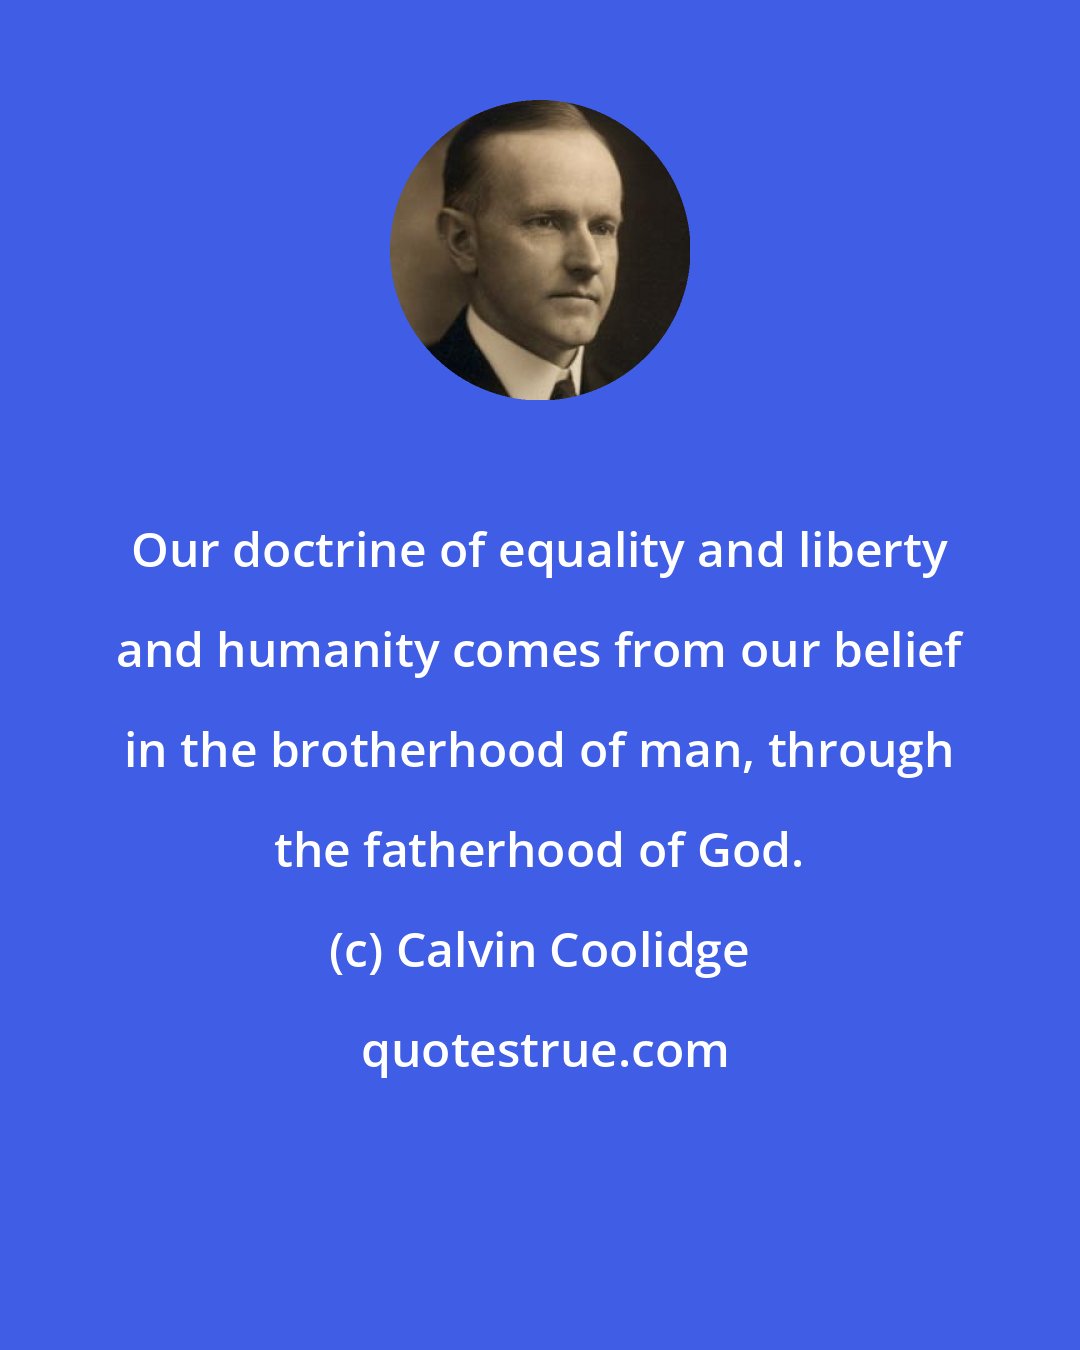 Calvin Coolidge: Our doctrine of equality and liberty and humanity comes from our belief in the brotherhood of man, through the fatherhood of God.